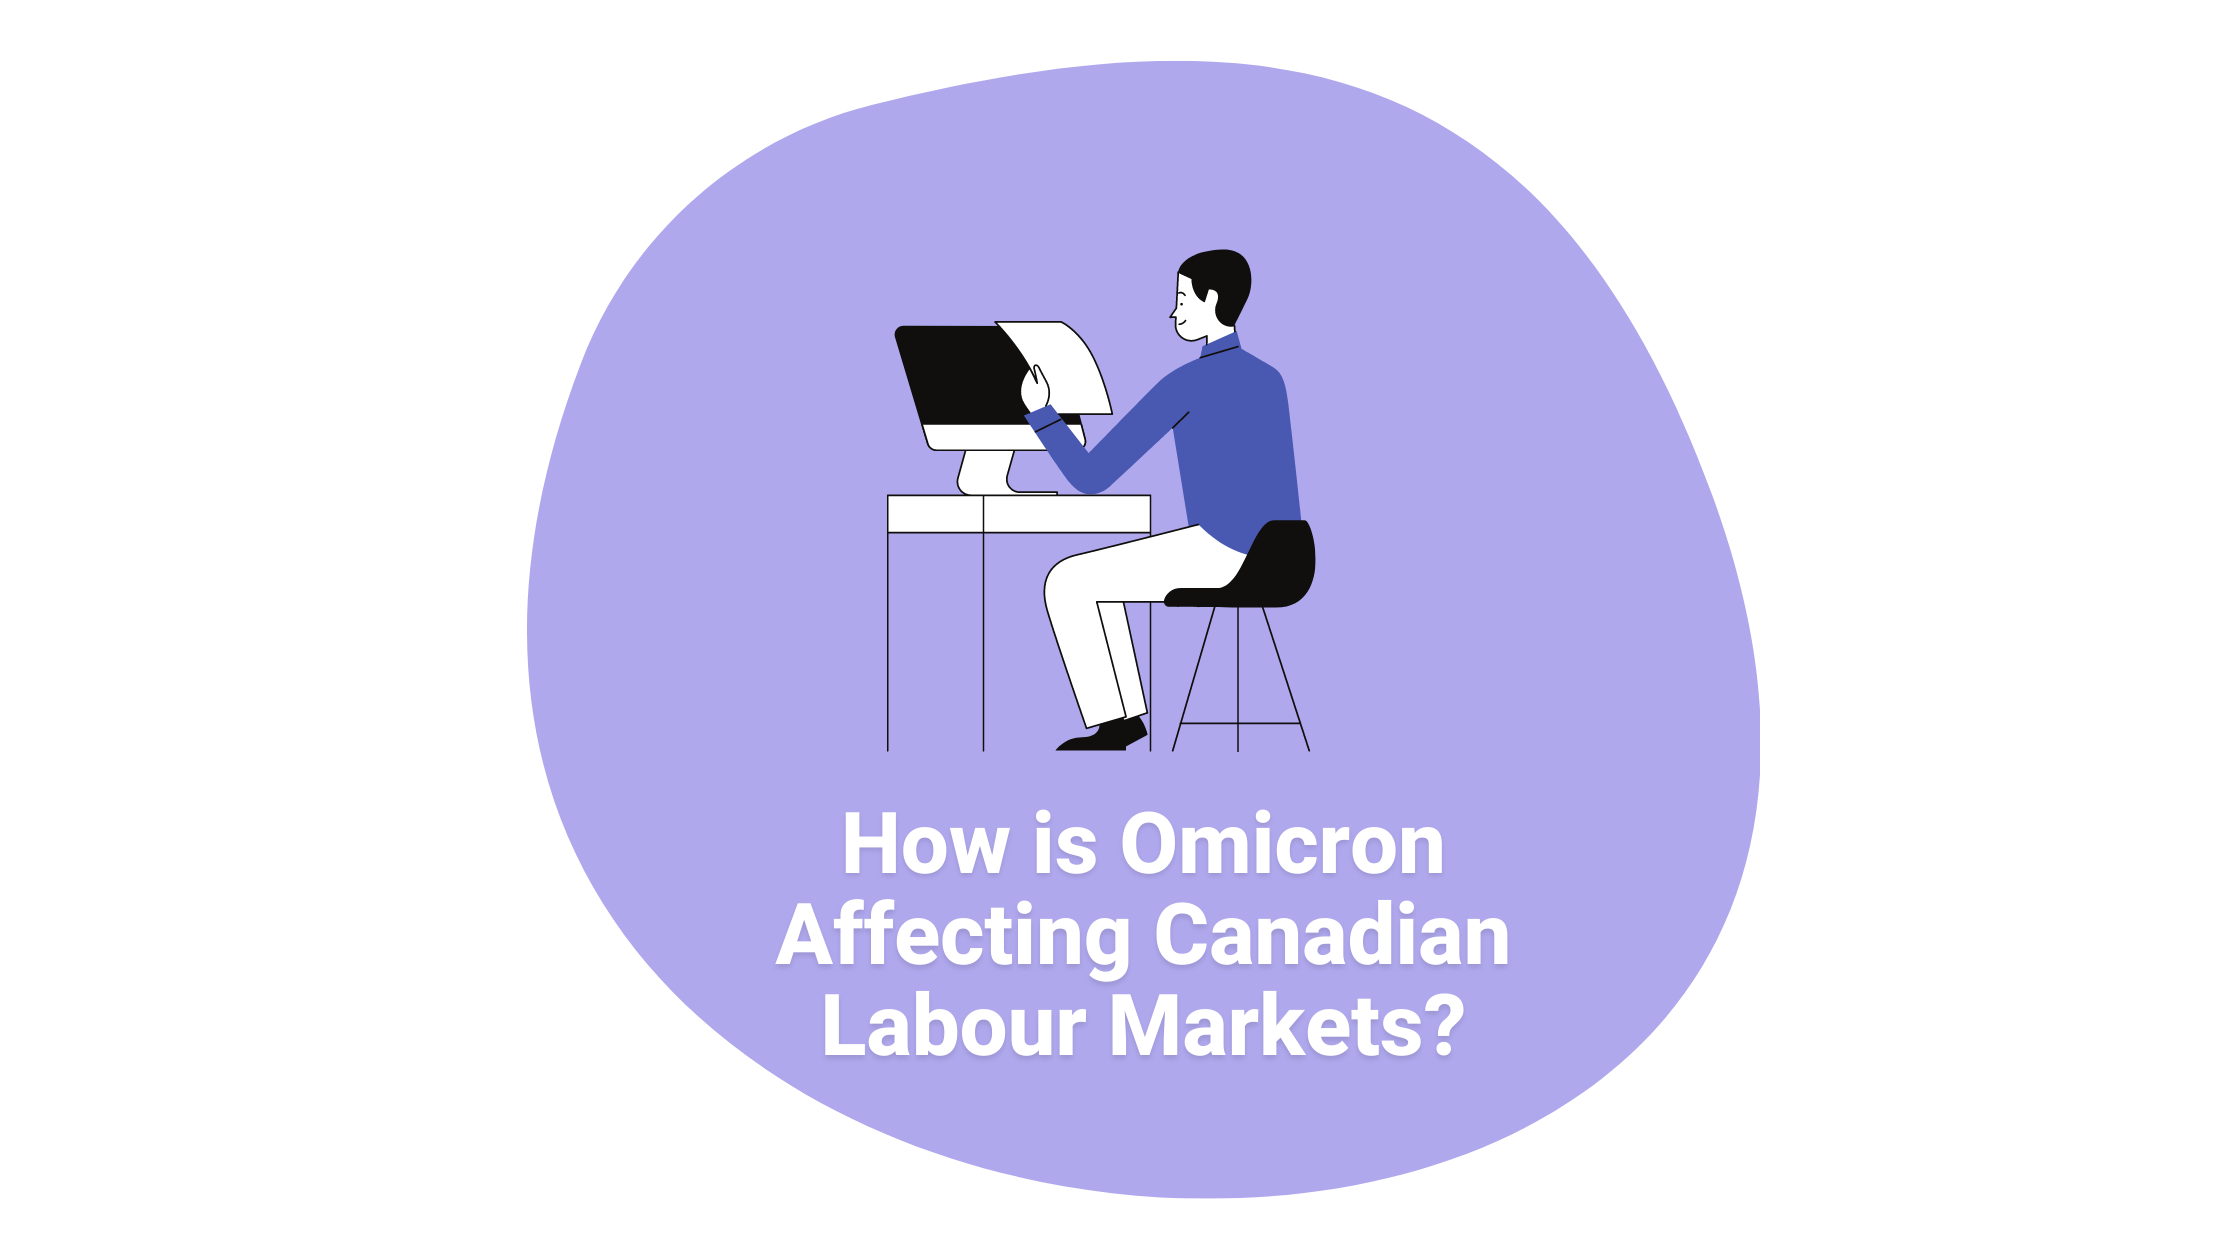 How is Omicron Affecting Canadian Labour Markets?